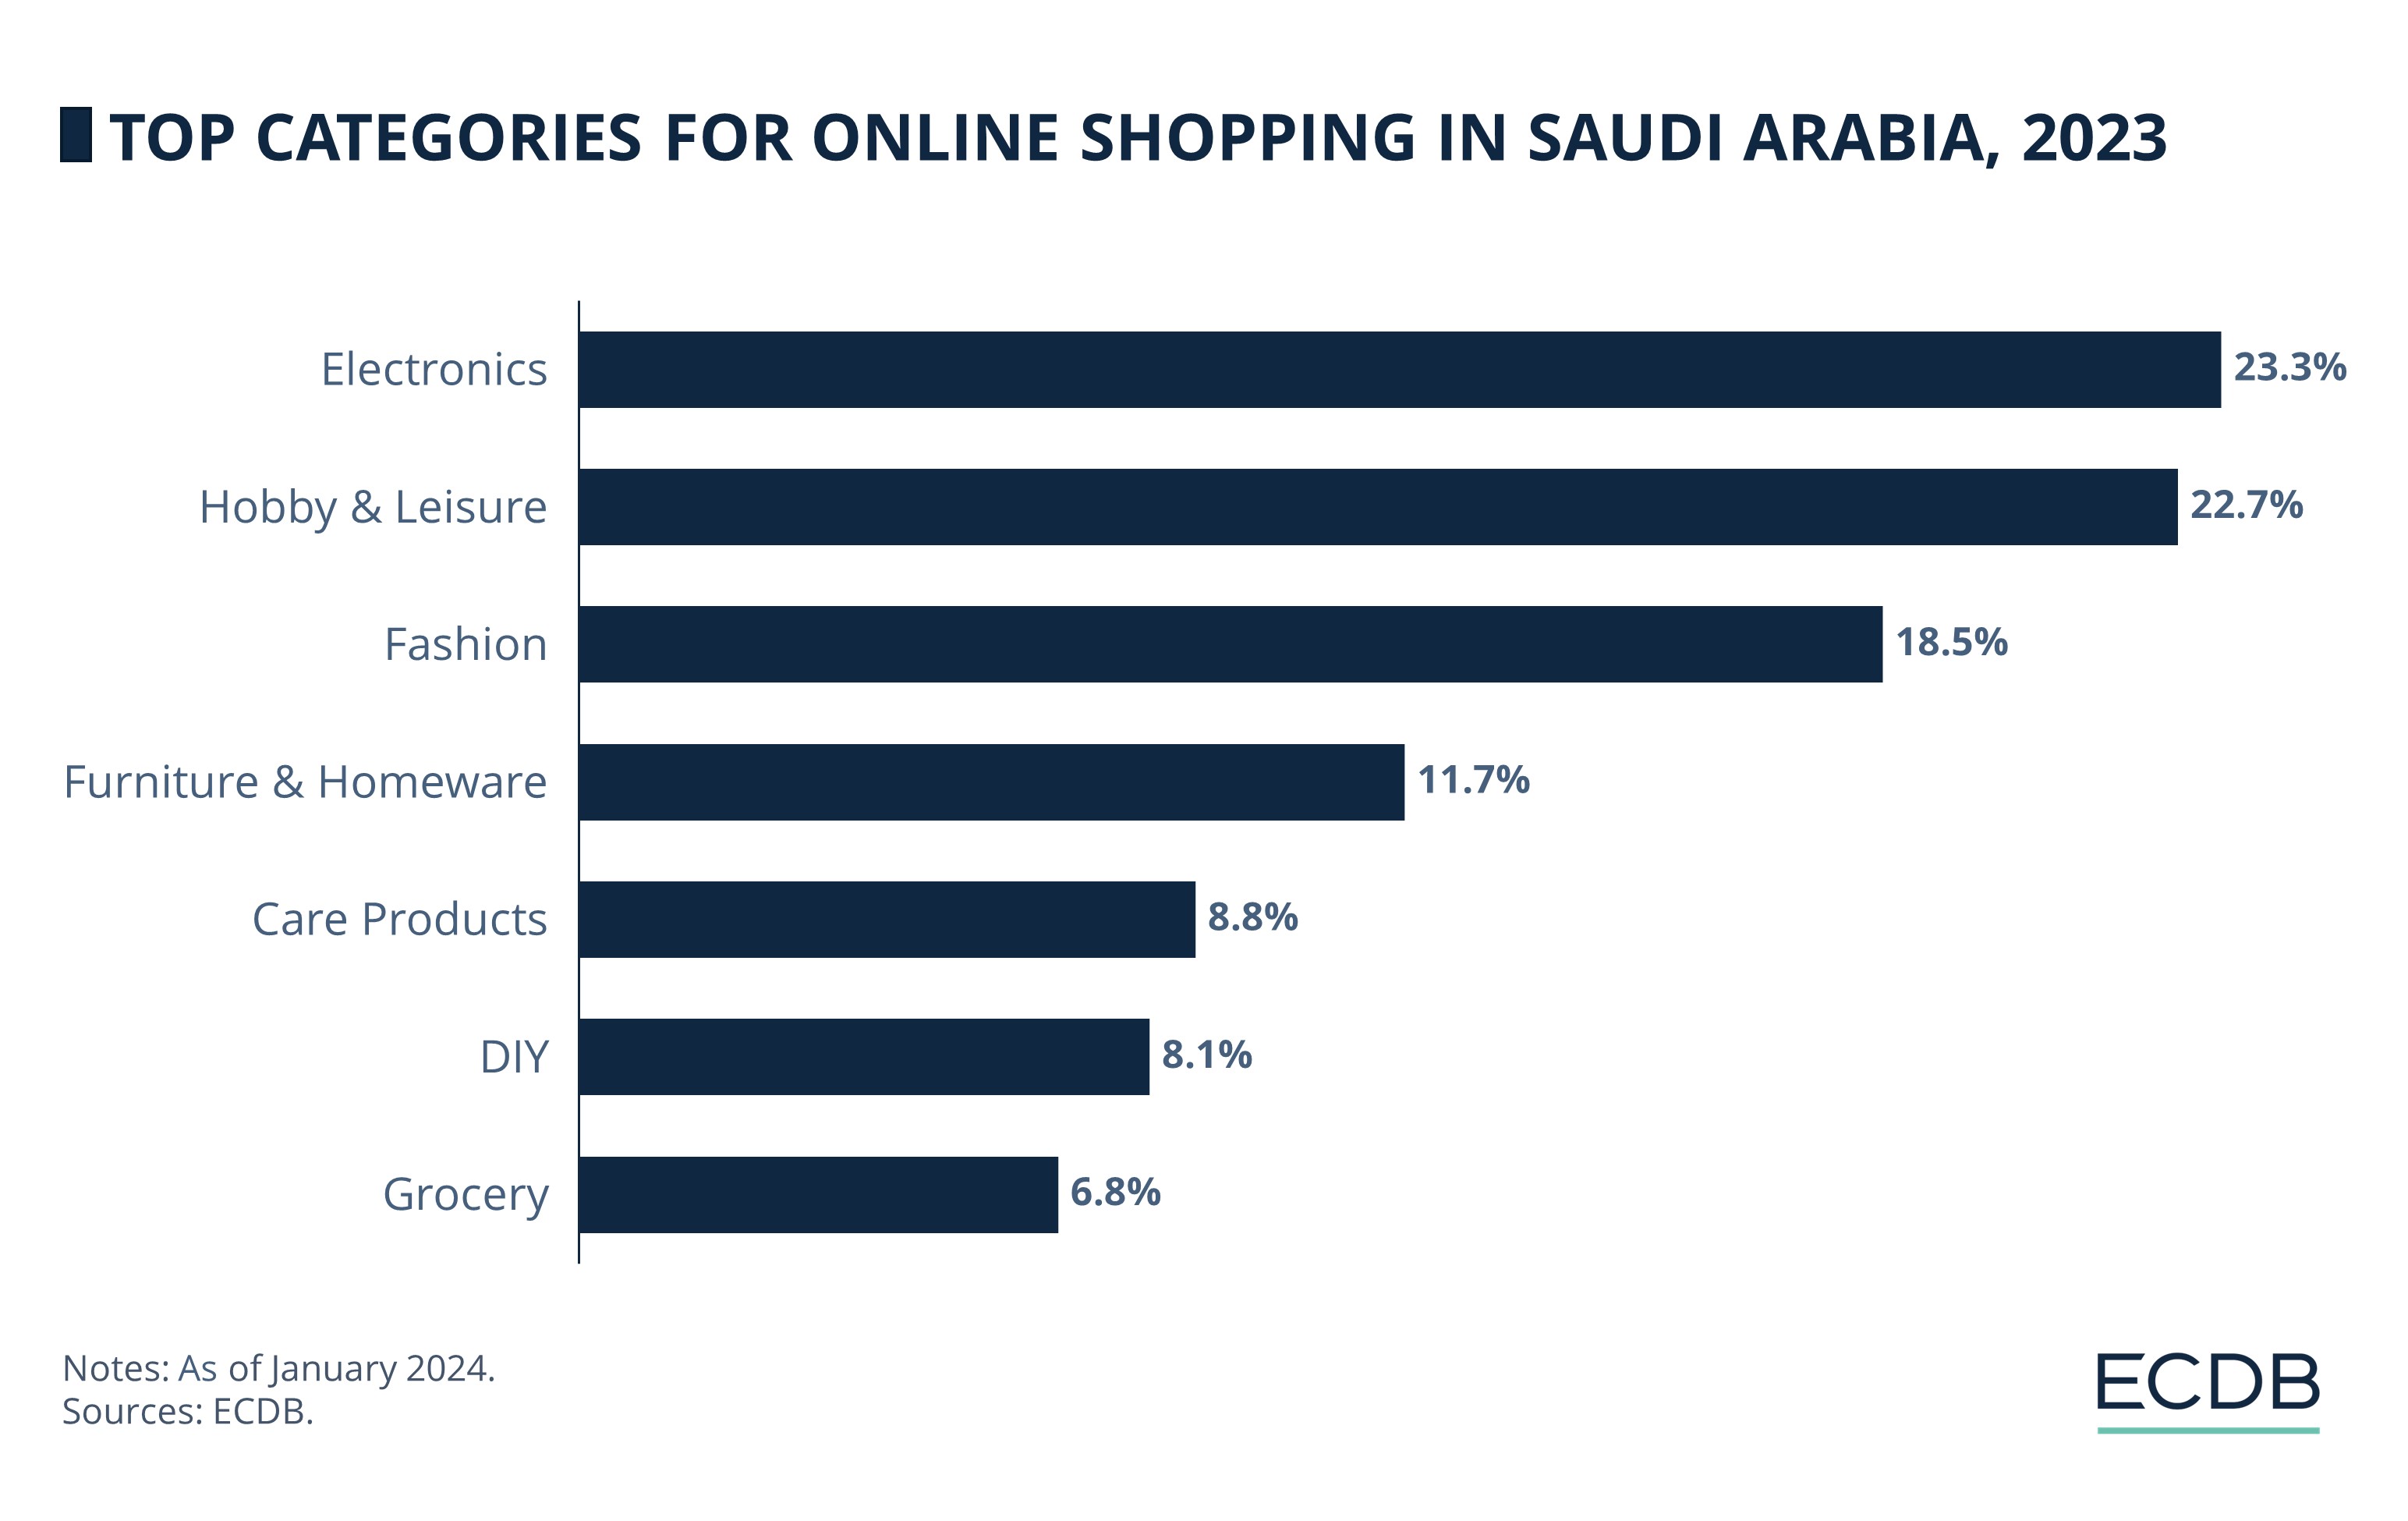 Top Categories for Online Shopping in Saudi Arabia, 2023